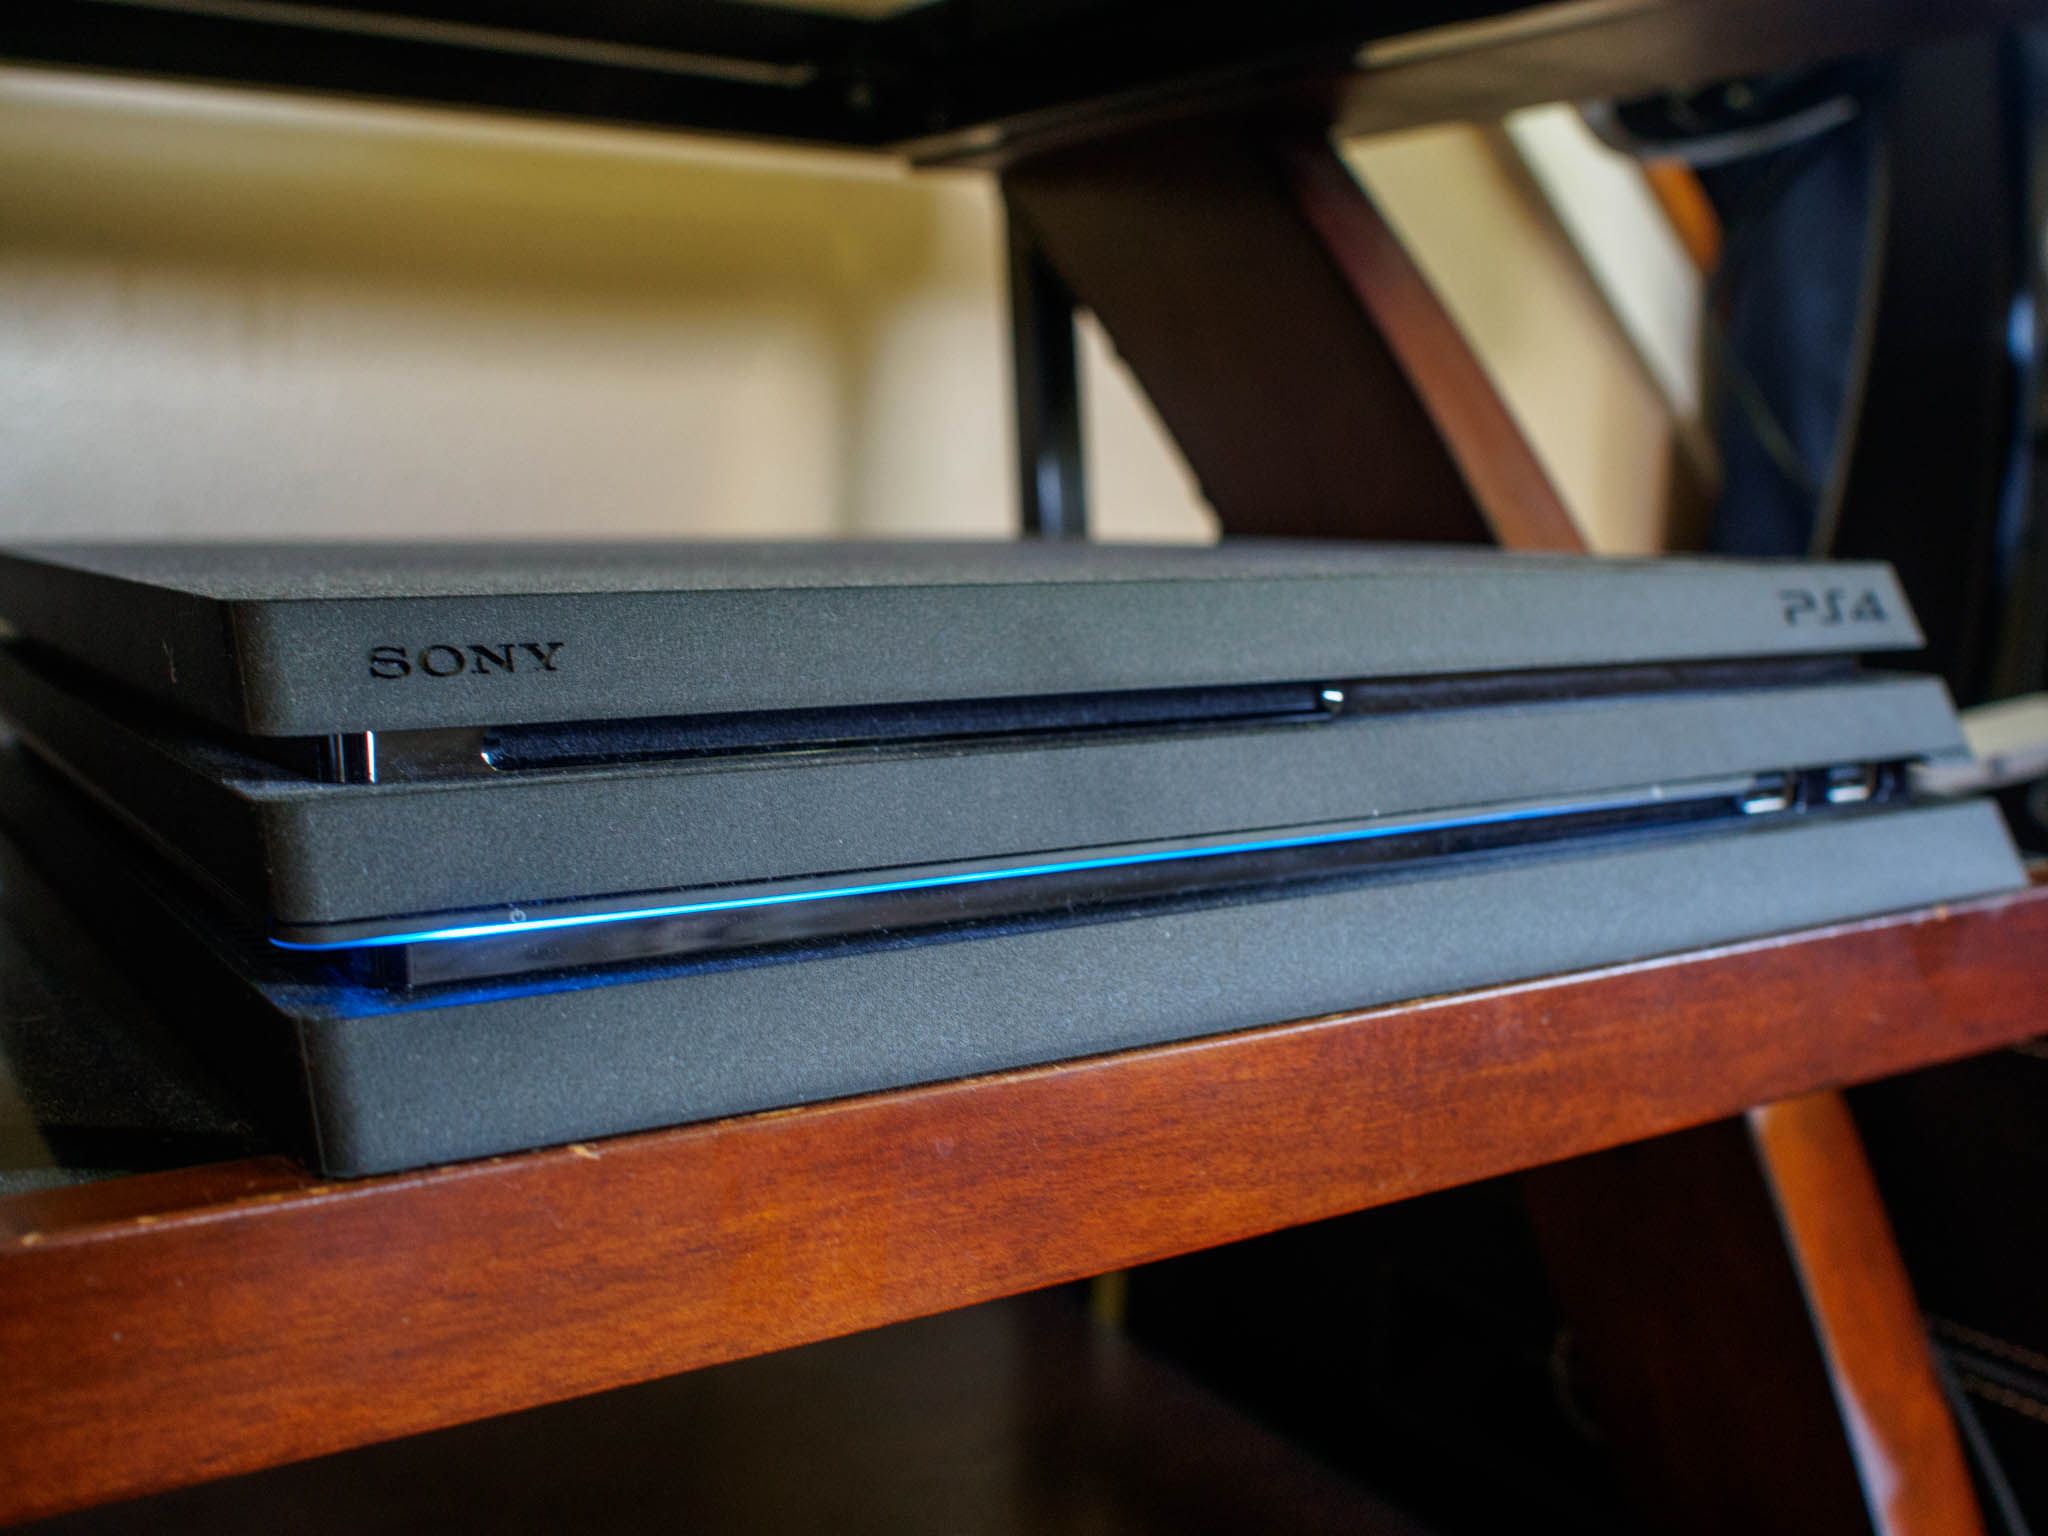 Best external hard drives for PS4 in 2021